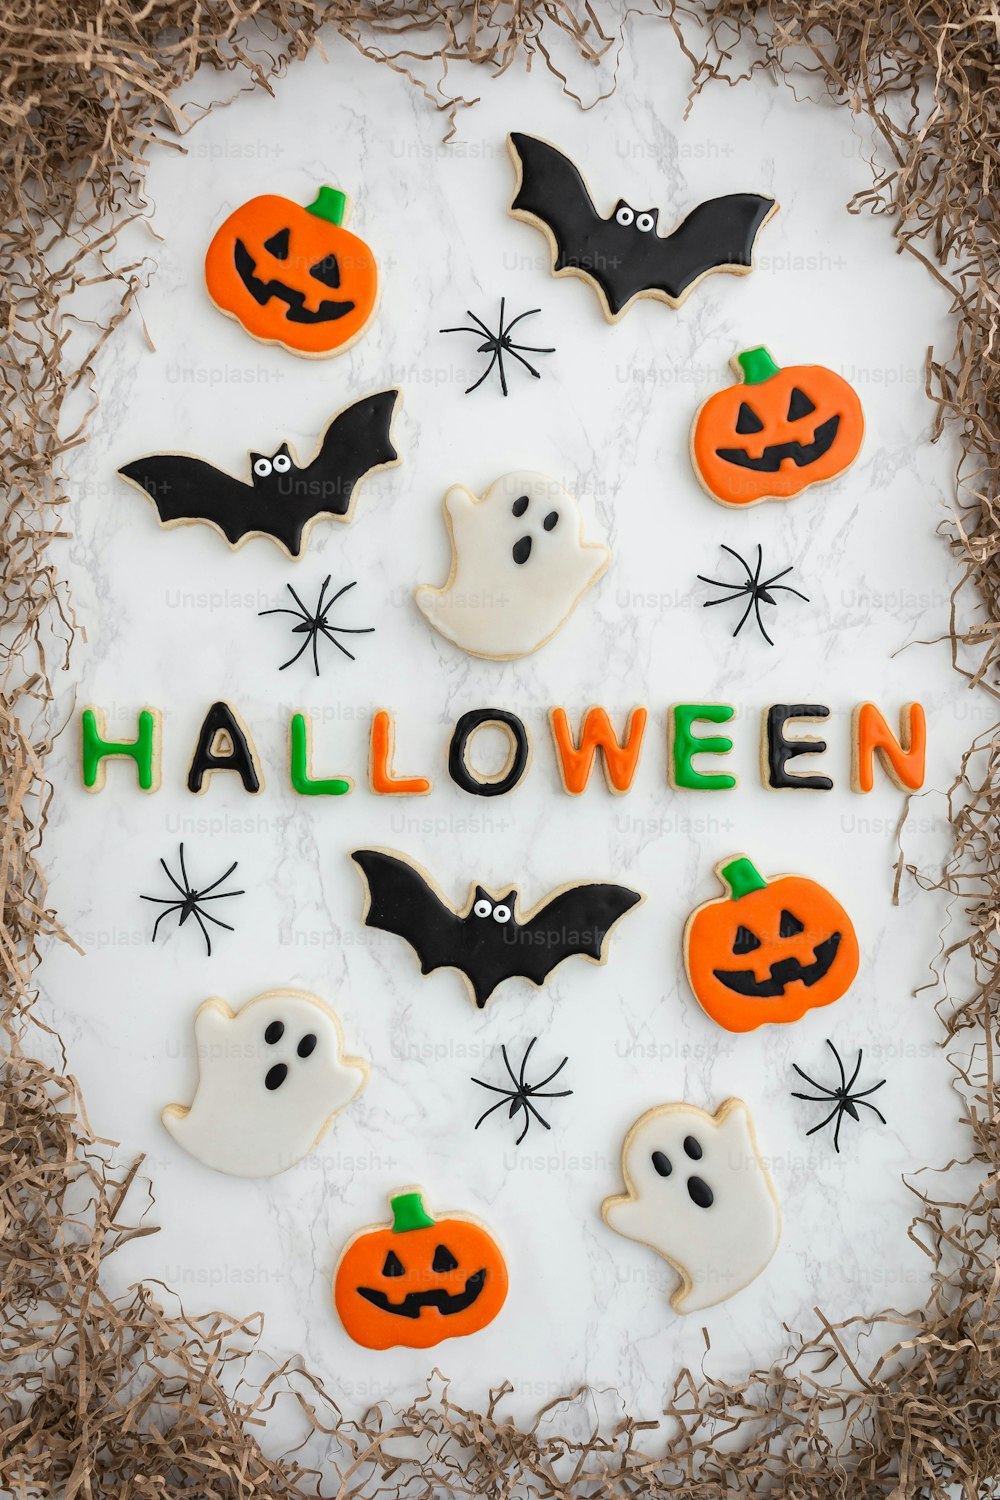 decorated cookies in the shape of bats and pumpkins